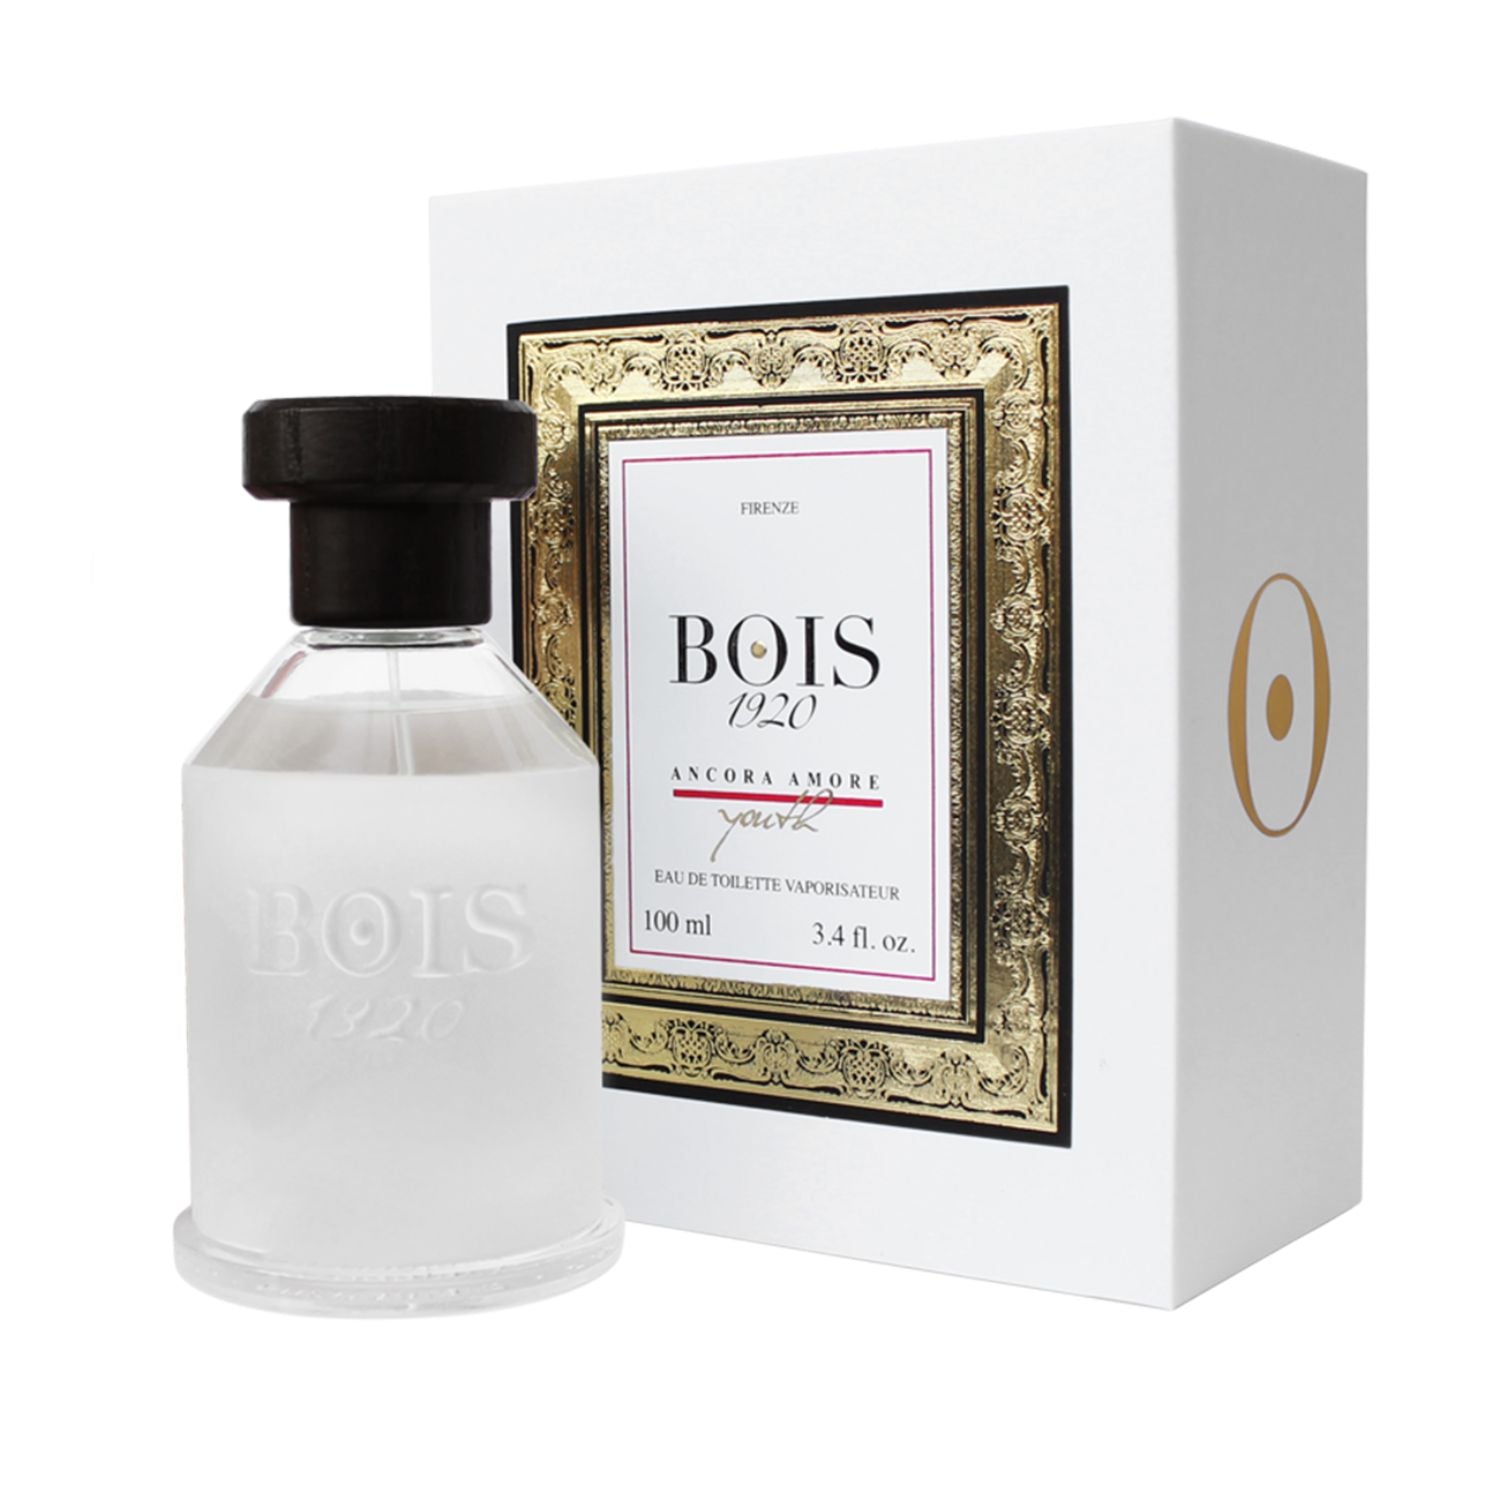 Bois 1920 – Ancora Amore, A Floral Soft Fragrance For Women And Mena Gentle Breeze Of Jasmine Caresses Your Soft Skin And Empowers You With A Pleasant Sensation That You Cannot Describea Delicate And Fragile Fragrance Full Of Emotionsa Powdery Blend Filled With The Floral Notes Of Violet Sandalwood, Iris And Muskancora Amore, An Elegant And Precious Aroma.Top Notes: Powdery Notes Heart Notes: Violet, Sandalwood, Iris, Jasmine, RoseBase Notes: Musk